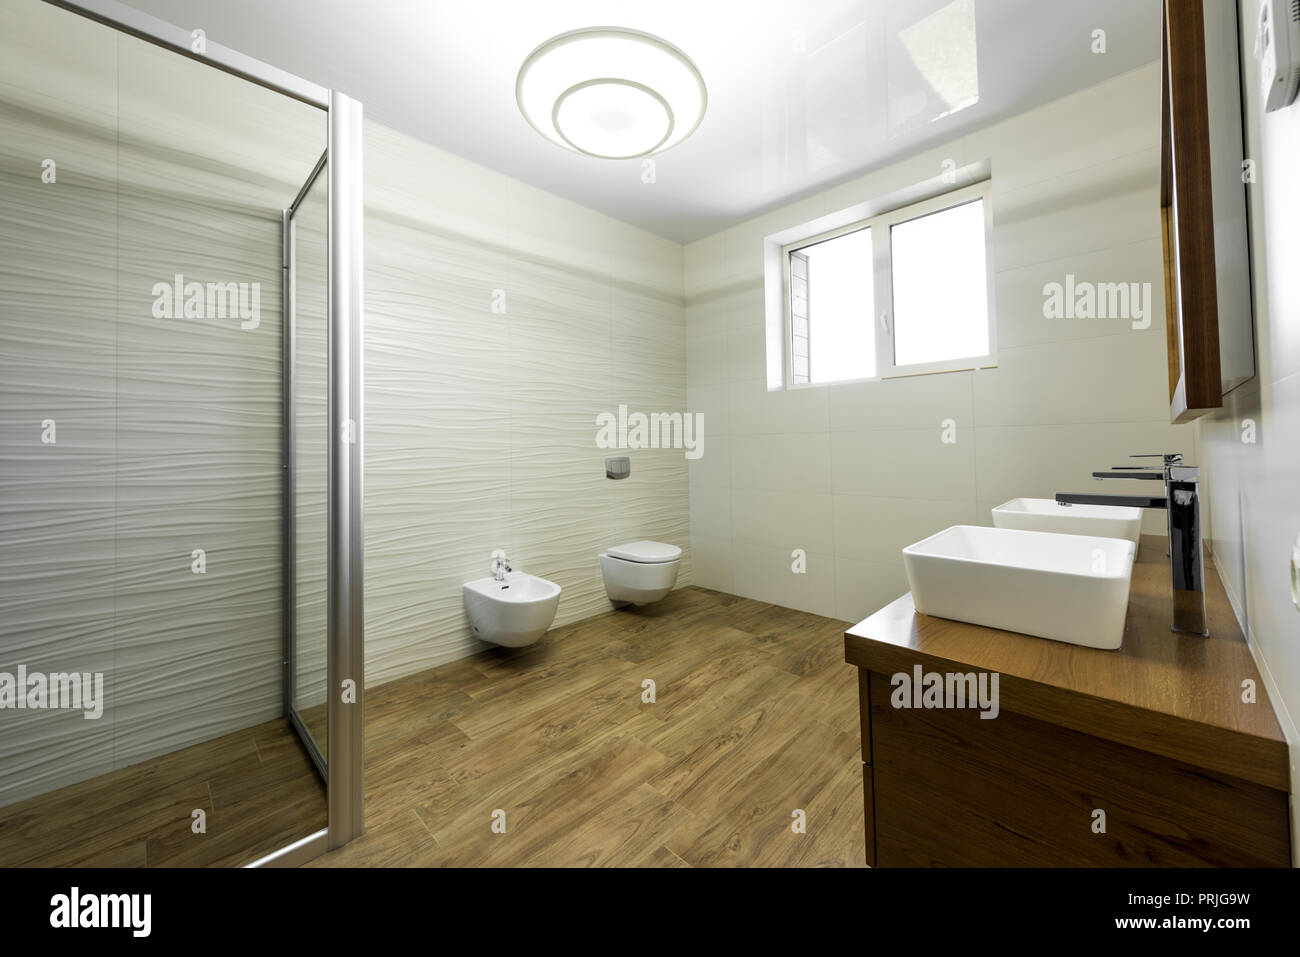 interior of modern bathroom with glass shower, toilet, bidet and two sinks Stock Photo